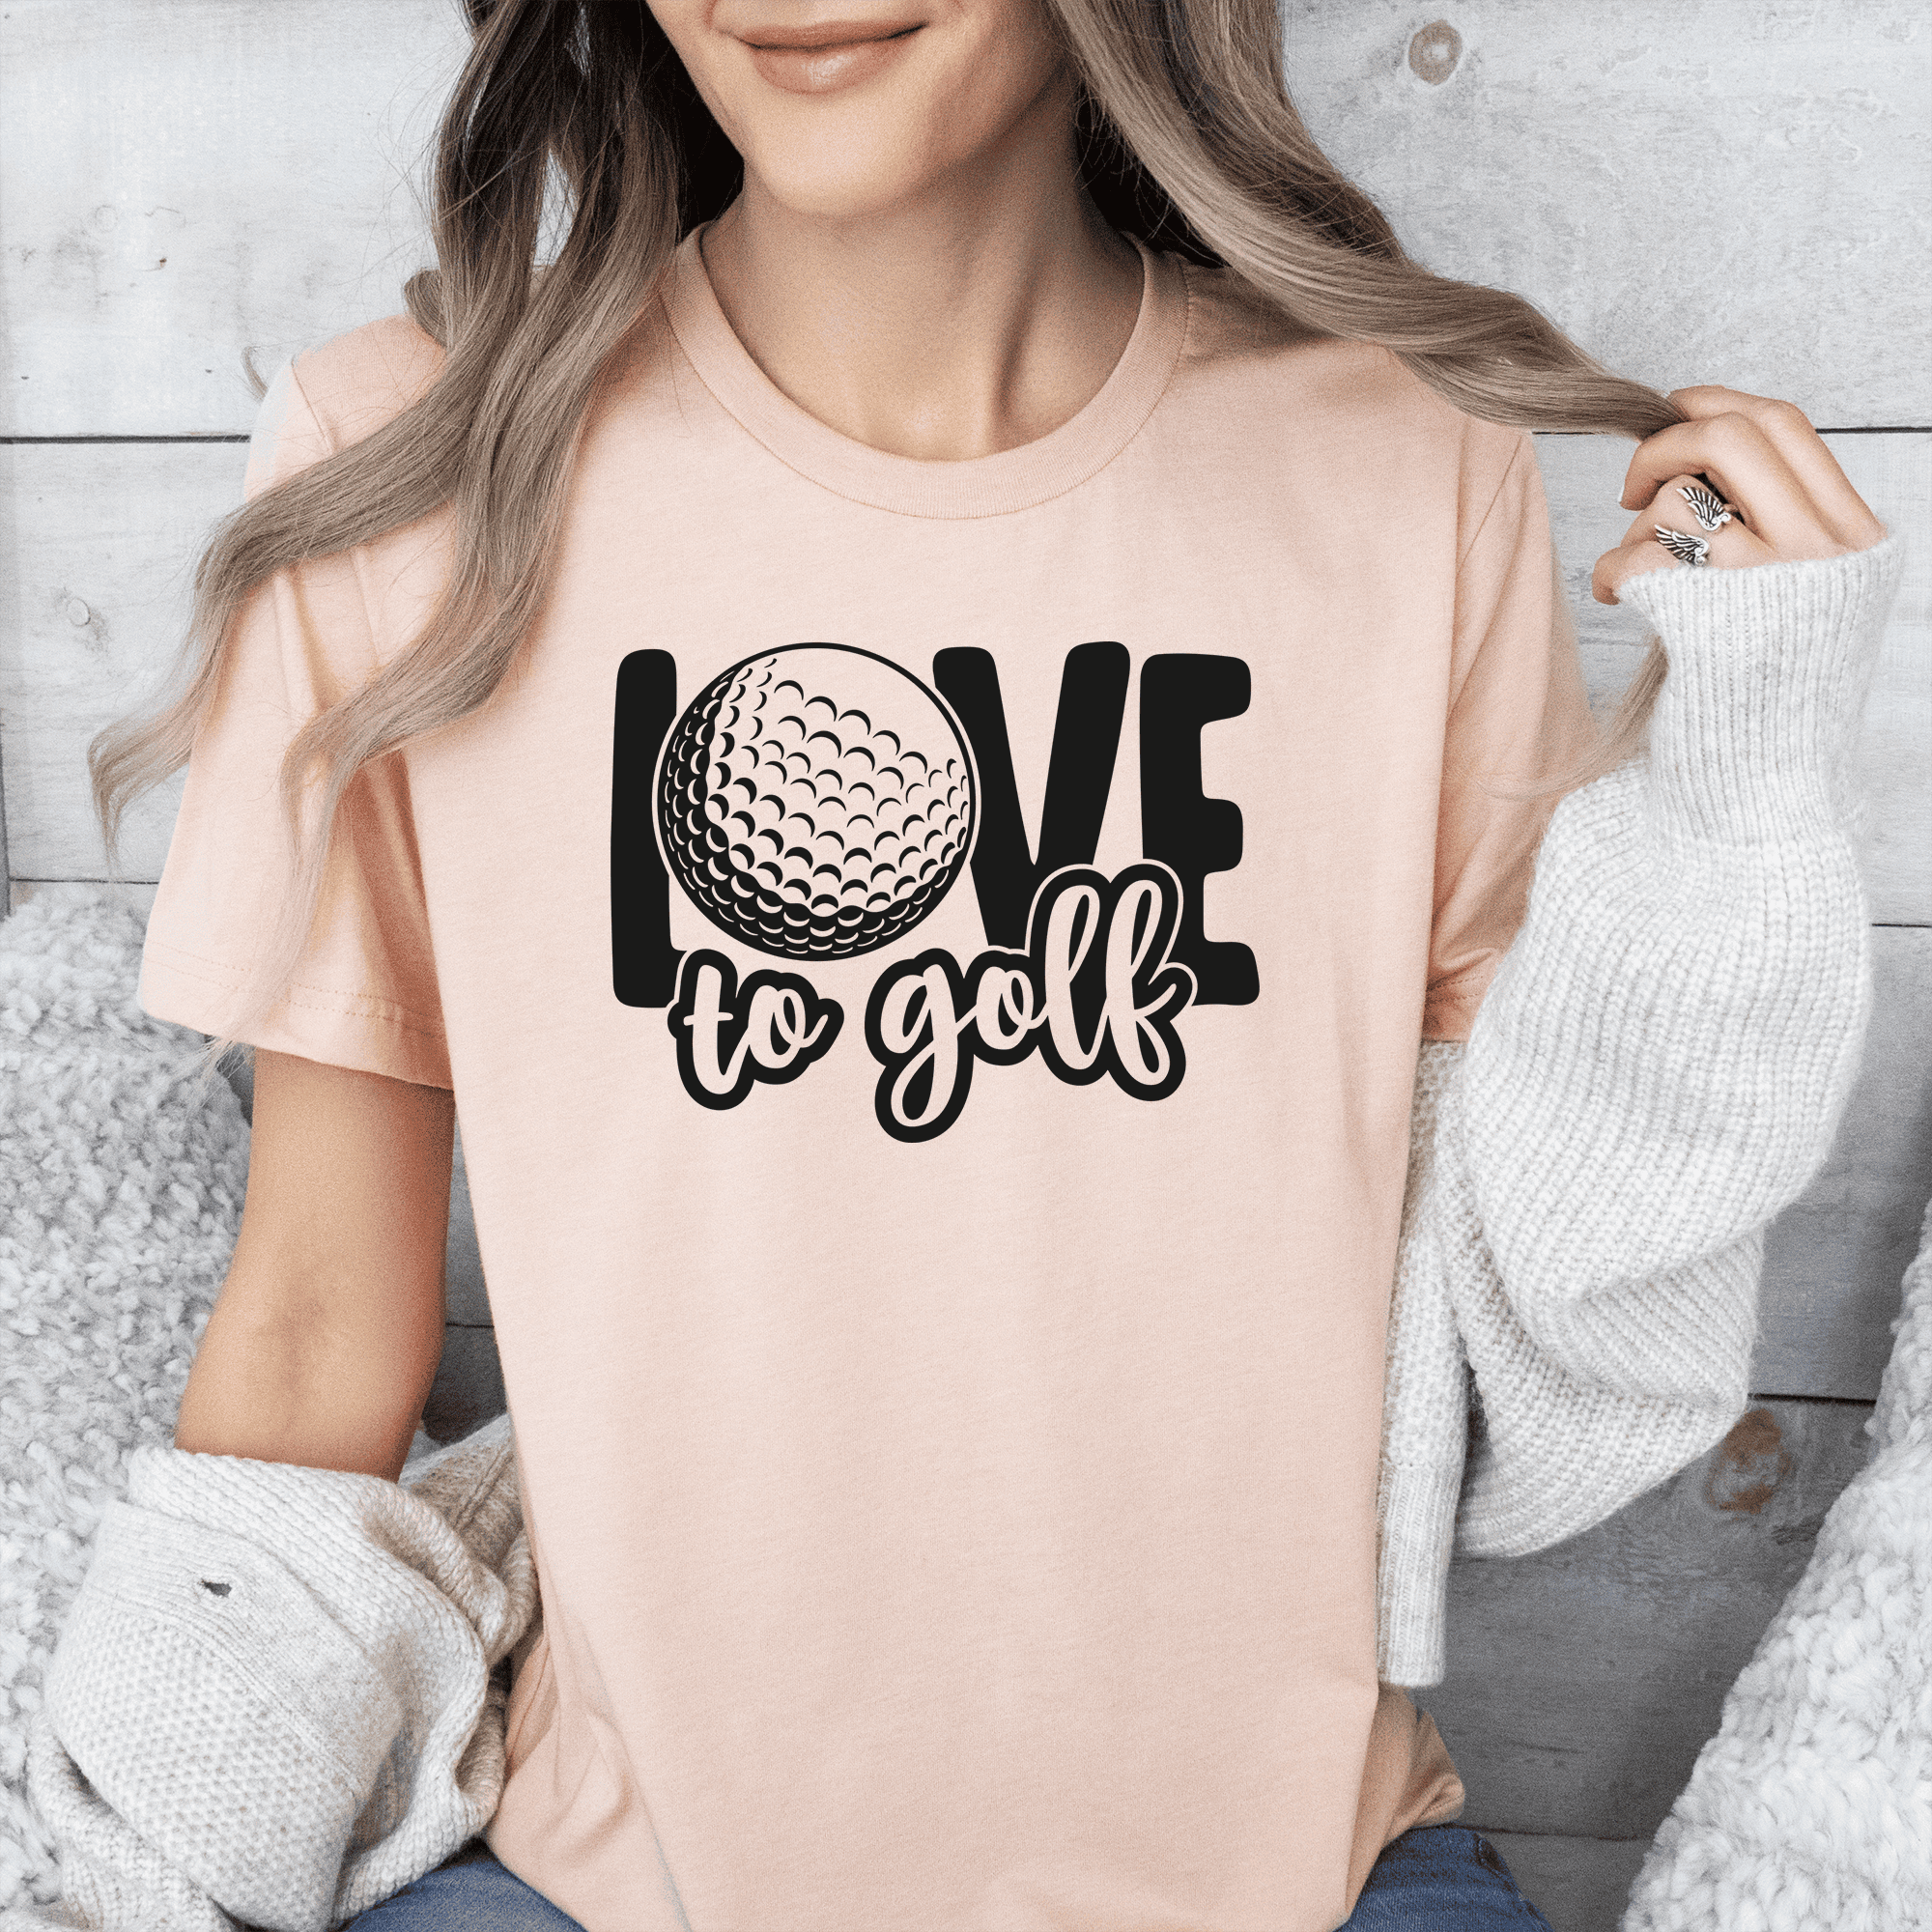 Womens Heather Peach T Shirt with Golf-Is-Love design